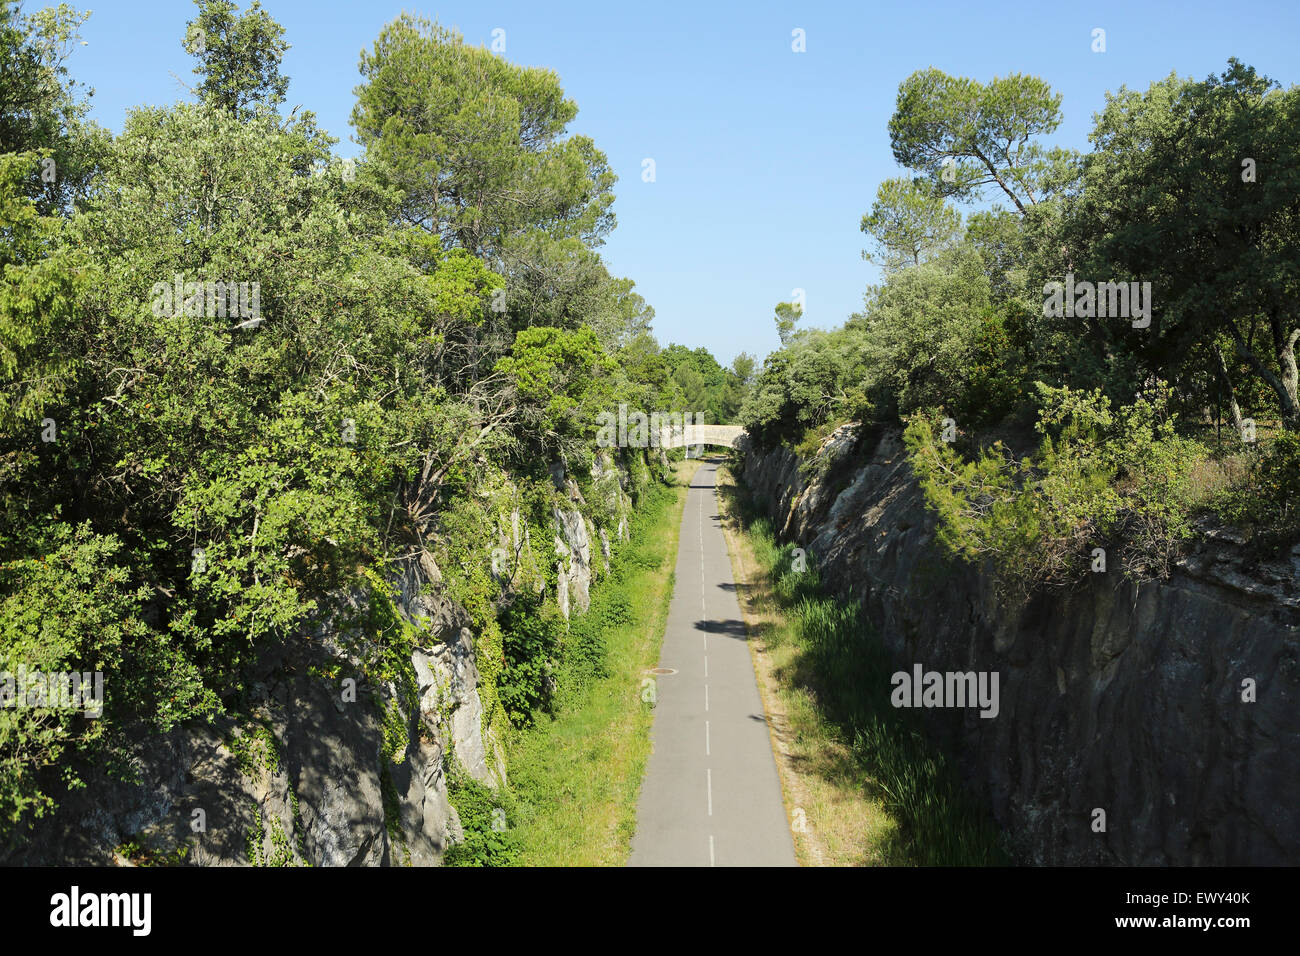 The Voie Verte (Green Way) near Sommieres, France. Stock Photo